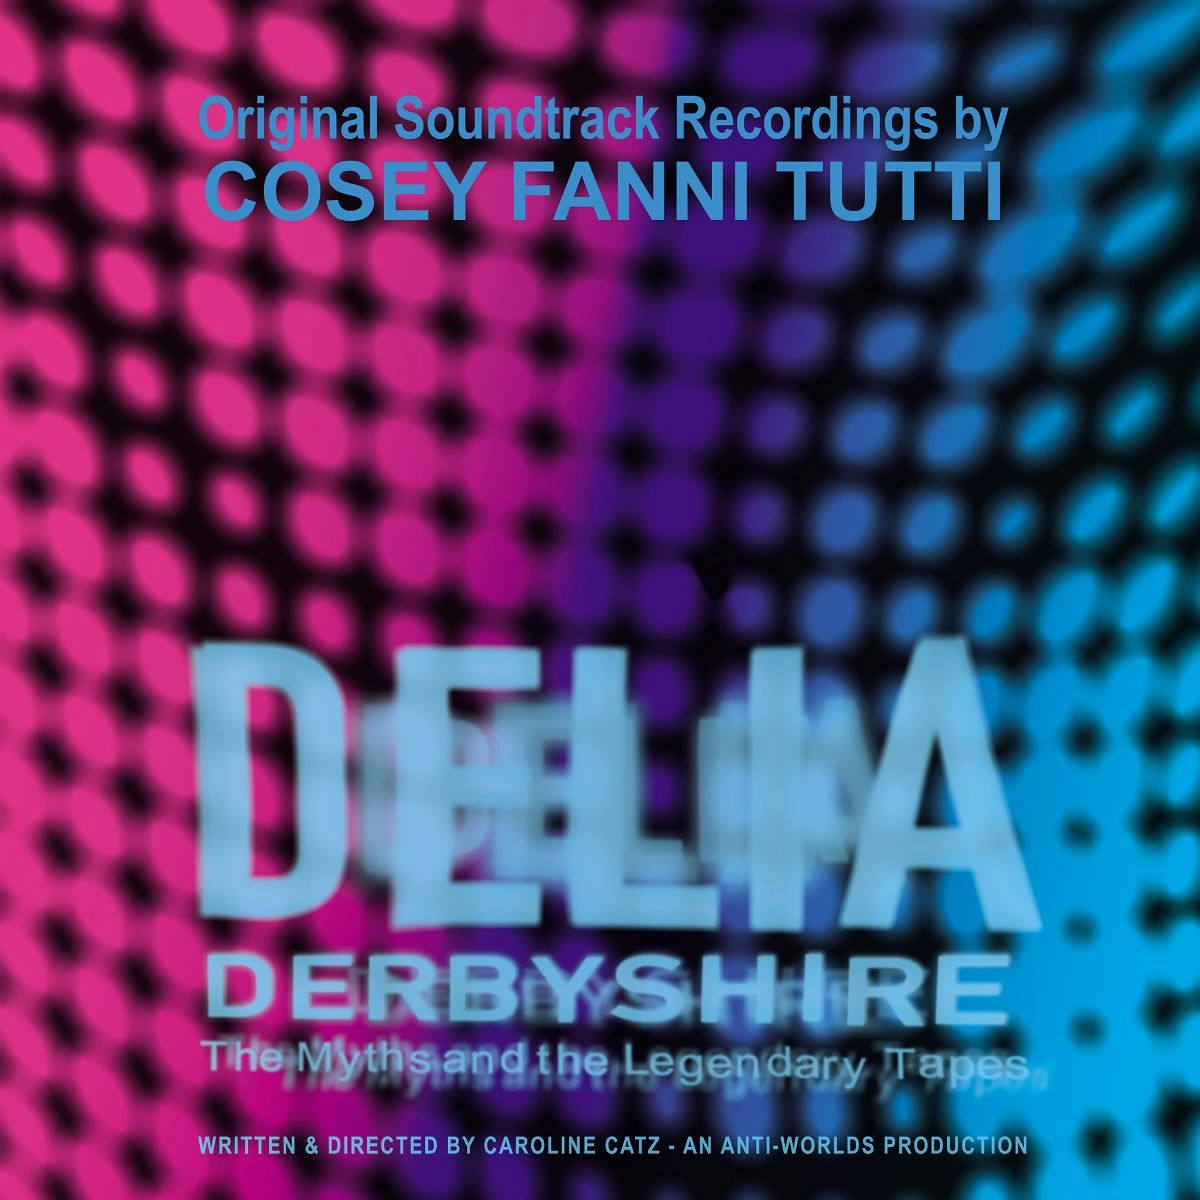 Album artwork for Album artwork for Original Soundtrack Recordings from the film ‘Delia Derbyshire: The Myths and the Legendary Tapes’ by Cosey Fanni Tutti by Original Soundtrack Recordings from the film ‘Delia Derbyshire: The Myths and the Legendary Tapes’ - Cosey Fanni Tutti